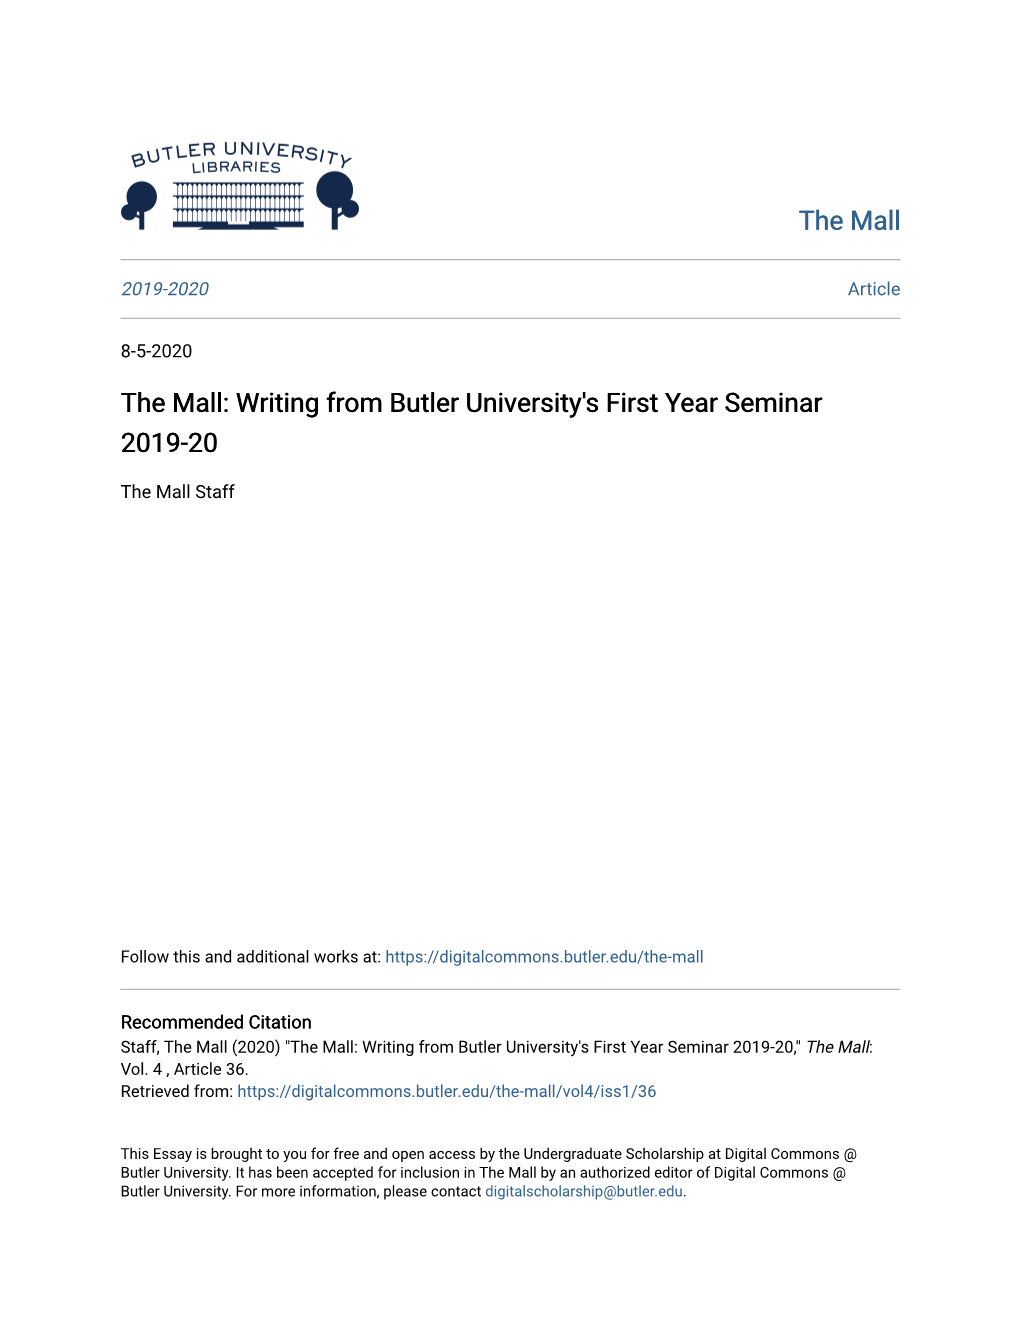 The Mall: Writing from Butler University's First Year Seminar 2019-20